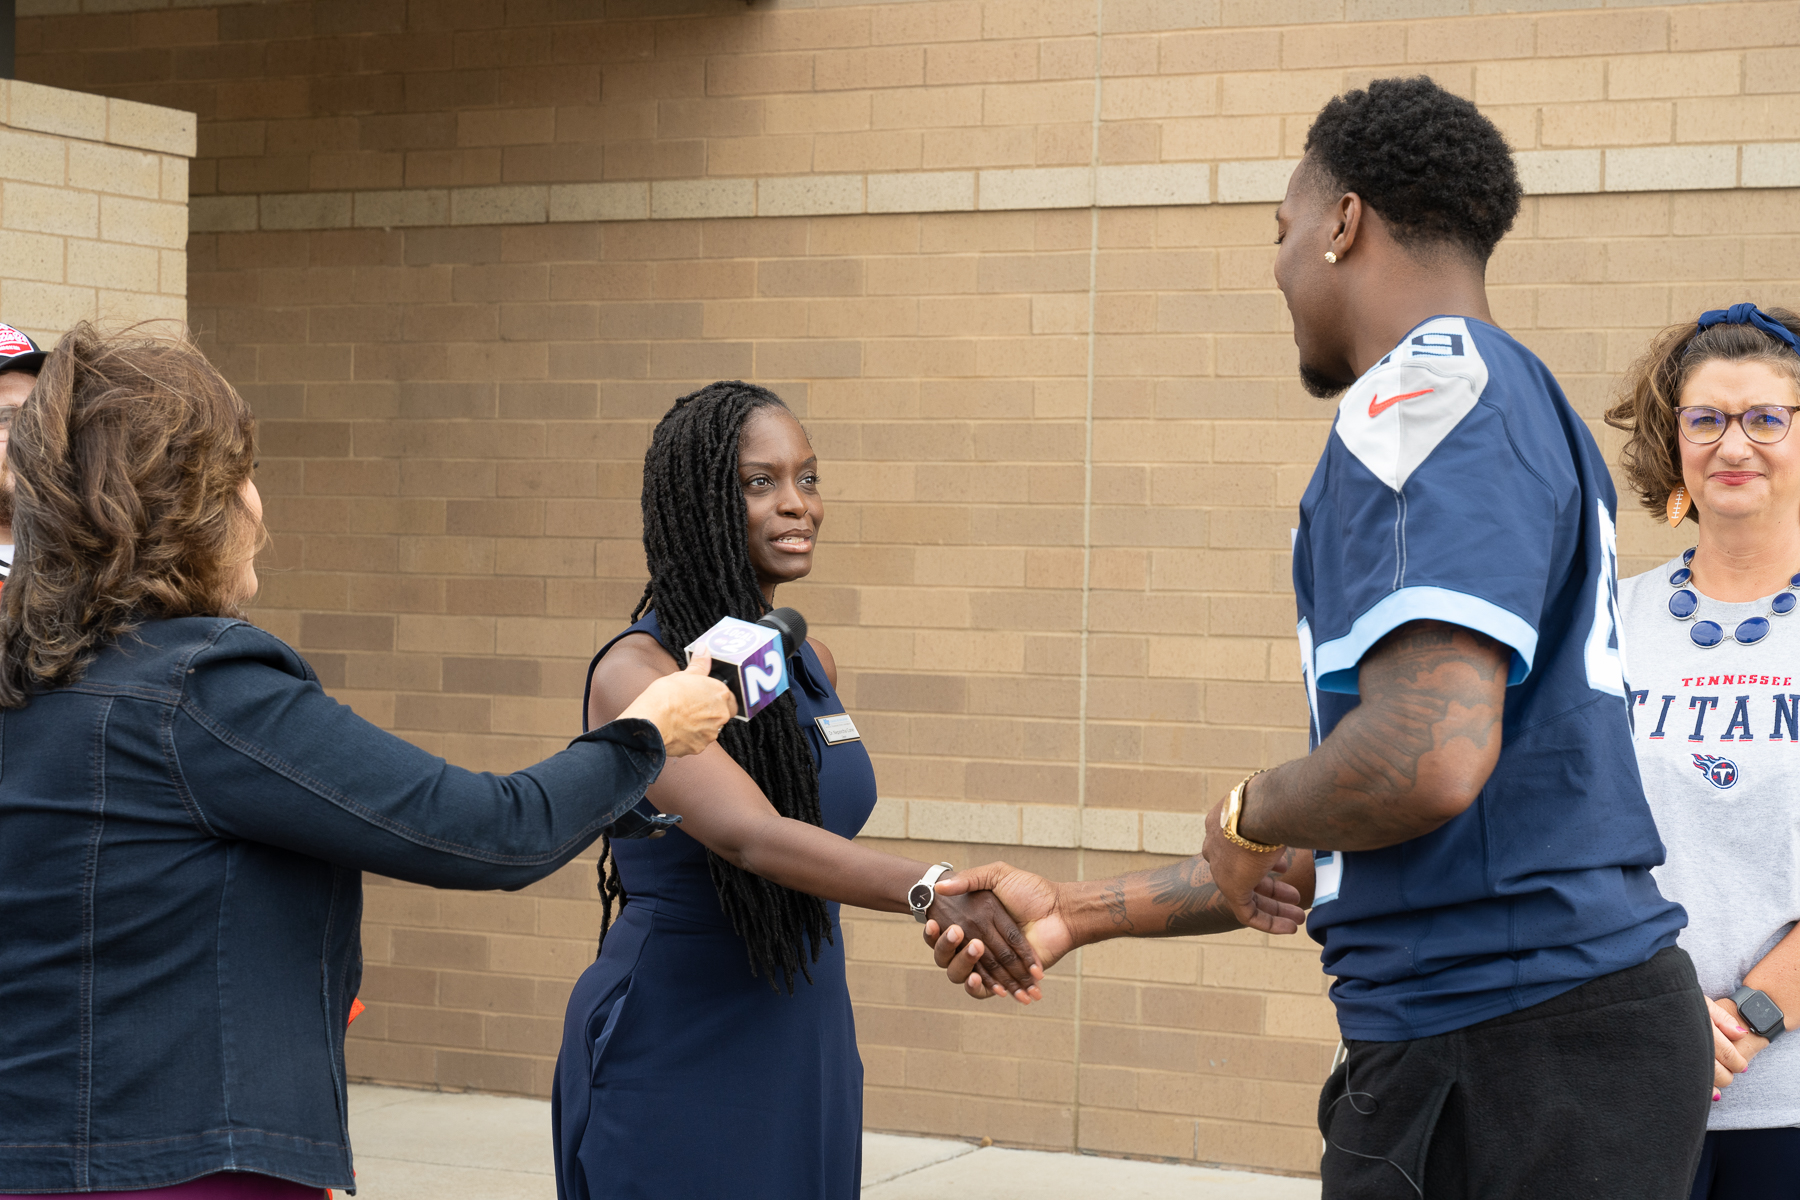 Middle Tennessee State University College of Education Dean Neporcha Cone greets Tennessee Titans player Arden Key recently as part of WKRN-TV News 2's "Take a Titan 2 School" series at Smith Springs Elementary School in Antioch, Tenn. (MTSU photo by James Cessna) 